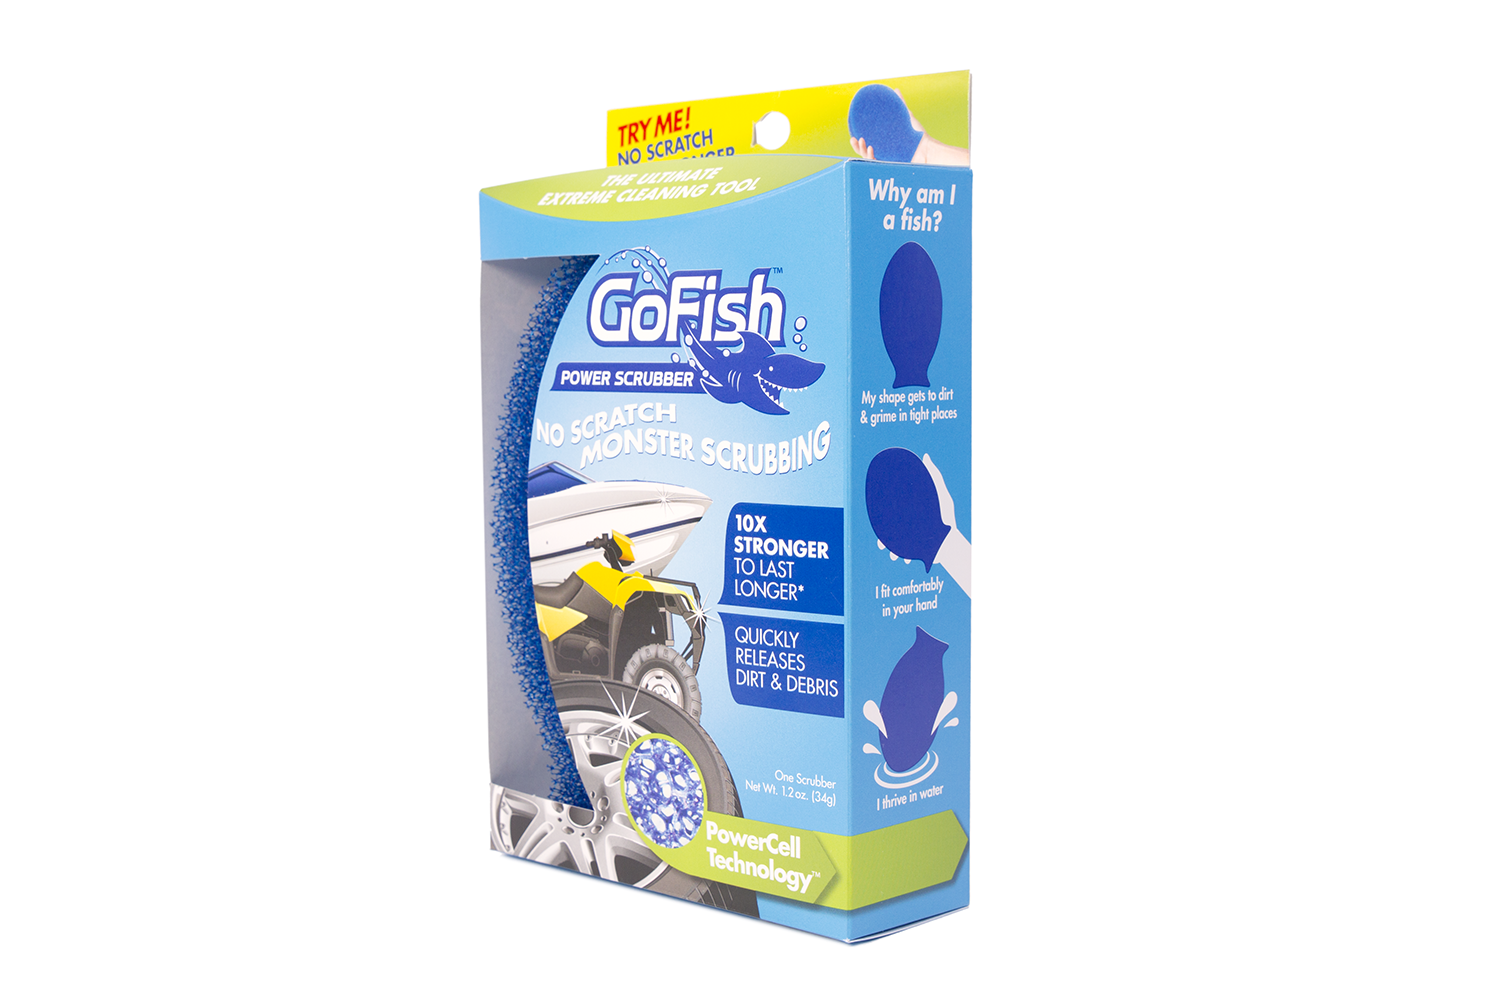 dishfish-gofish-power-scrubber-1pack-right-front.png